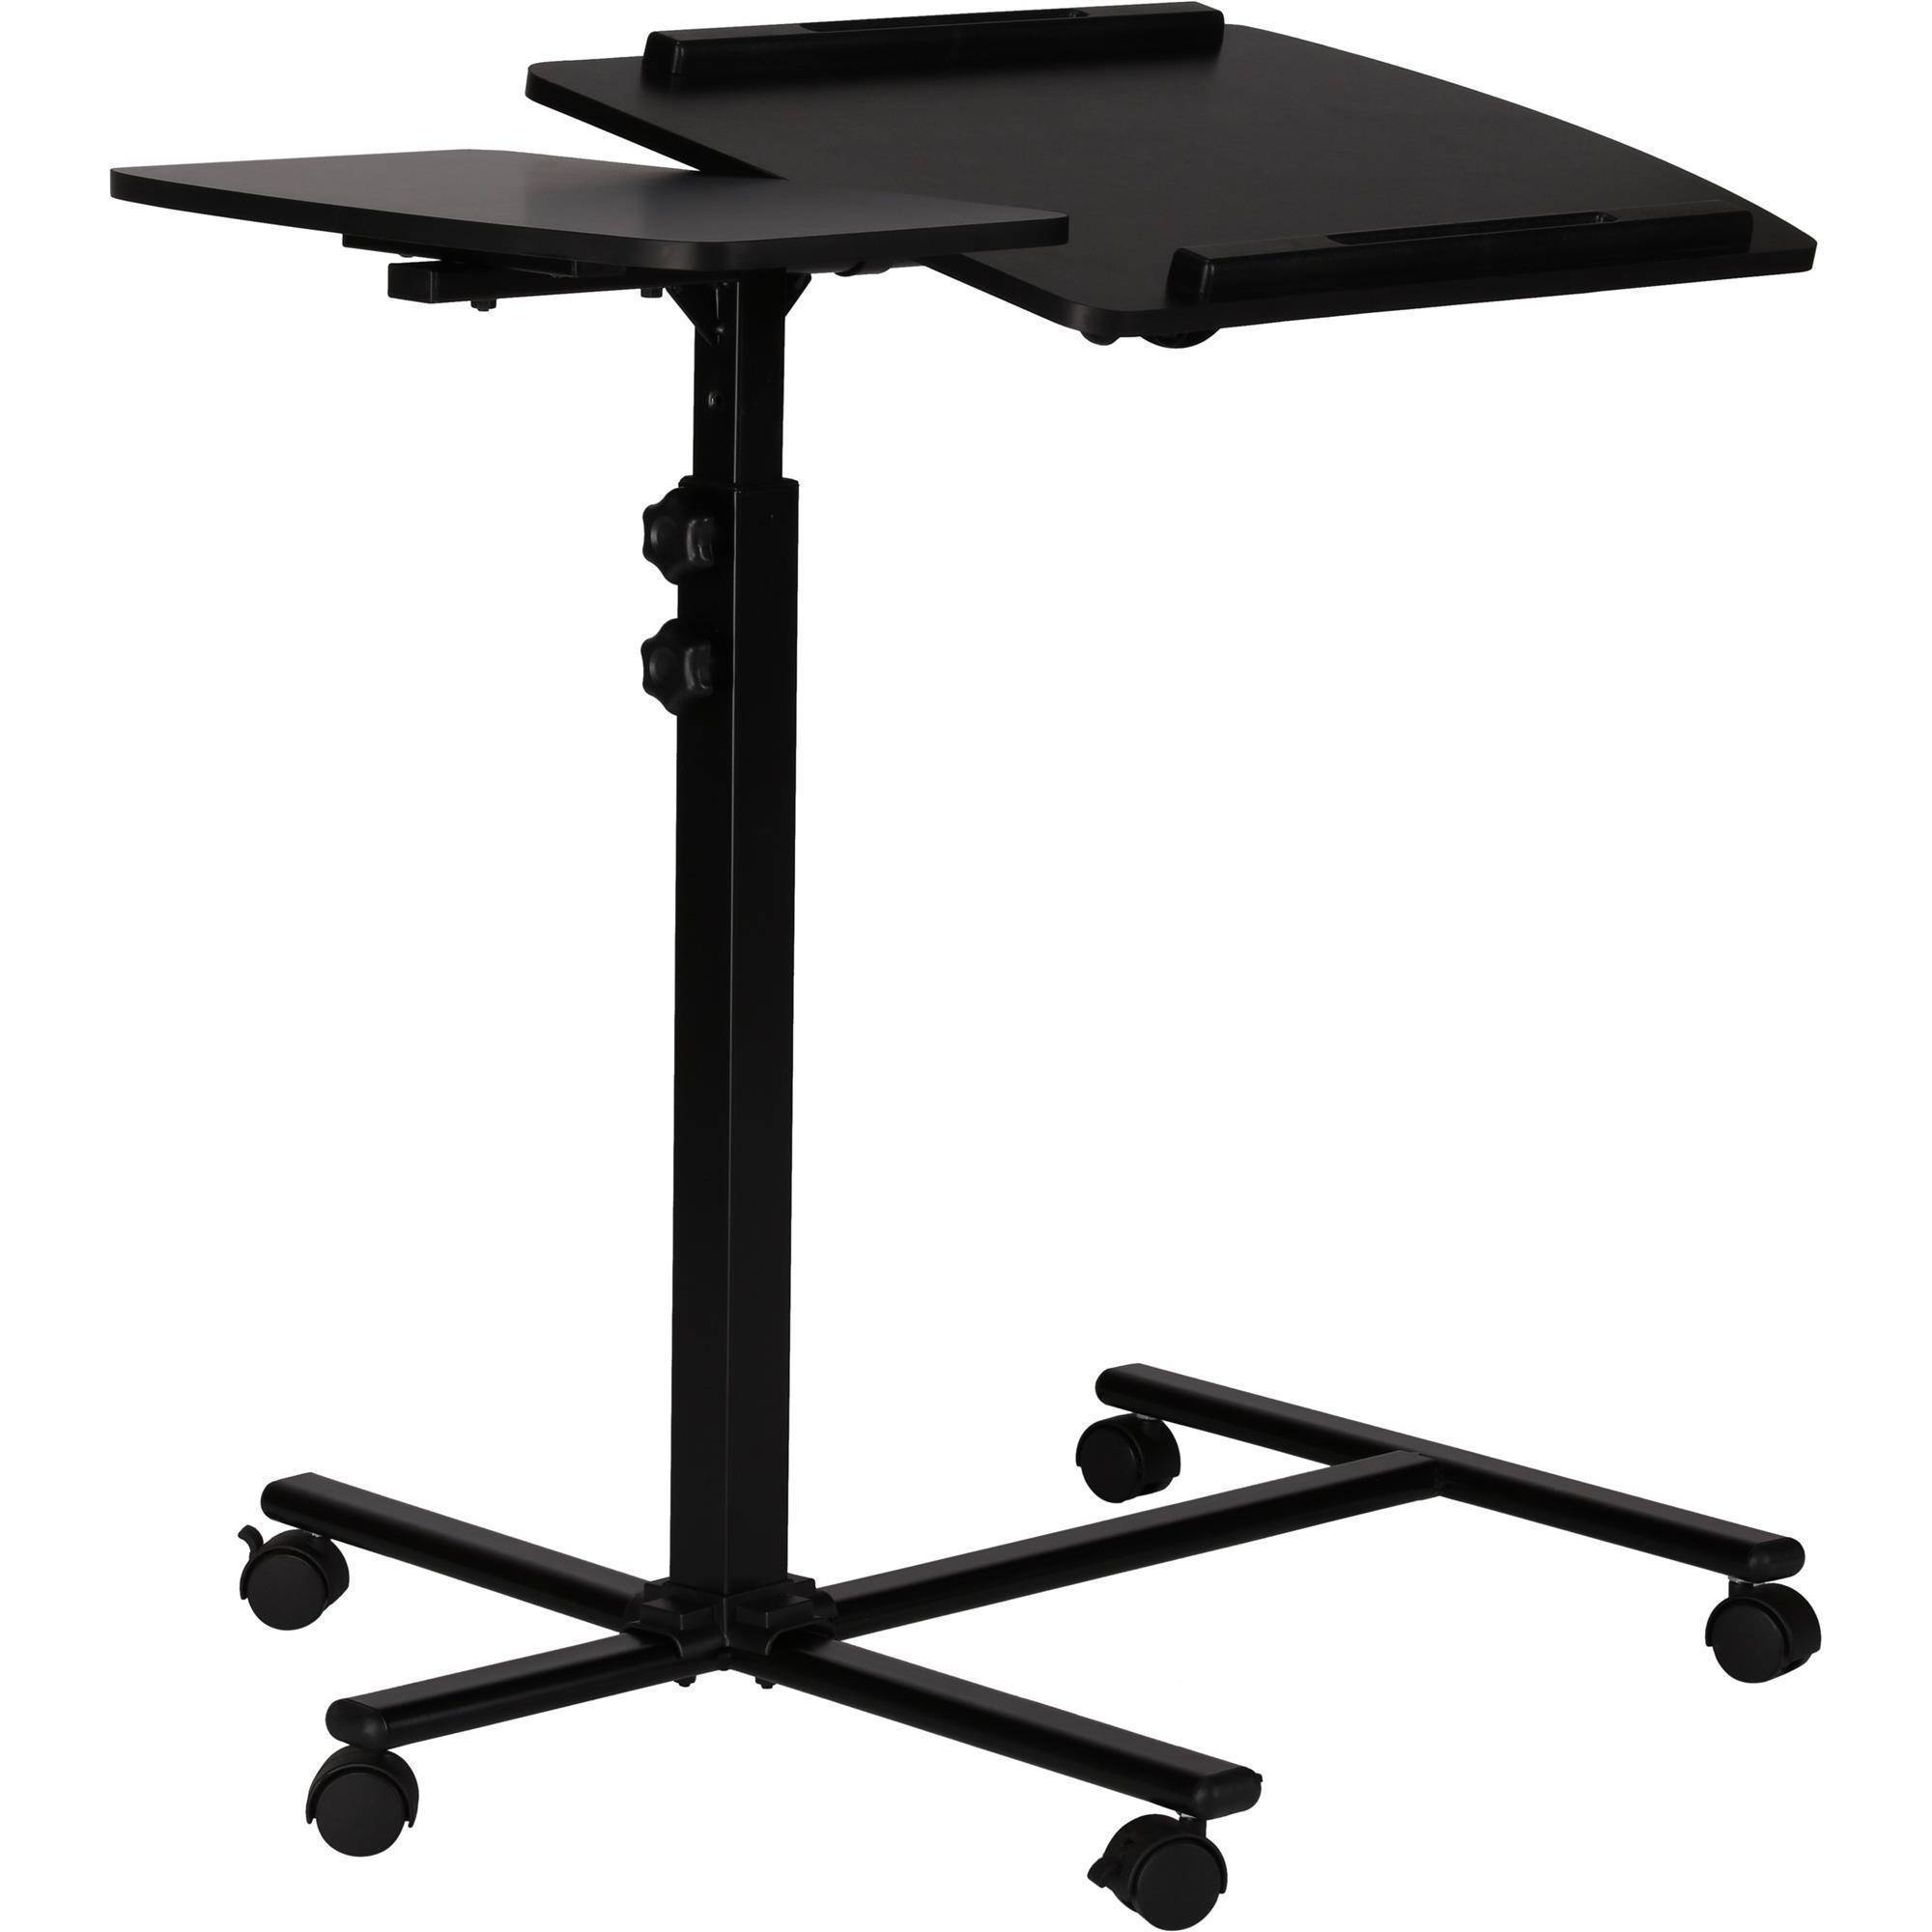 Mainstays Deluxe Laptop Cart, Black - image 3 of 8